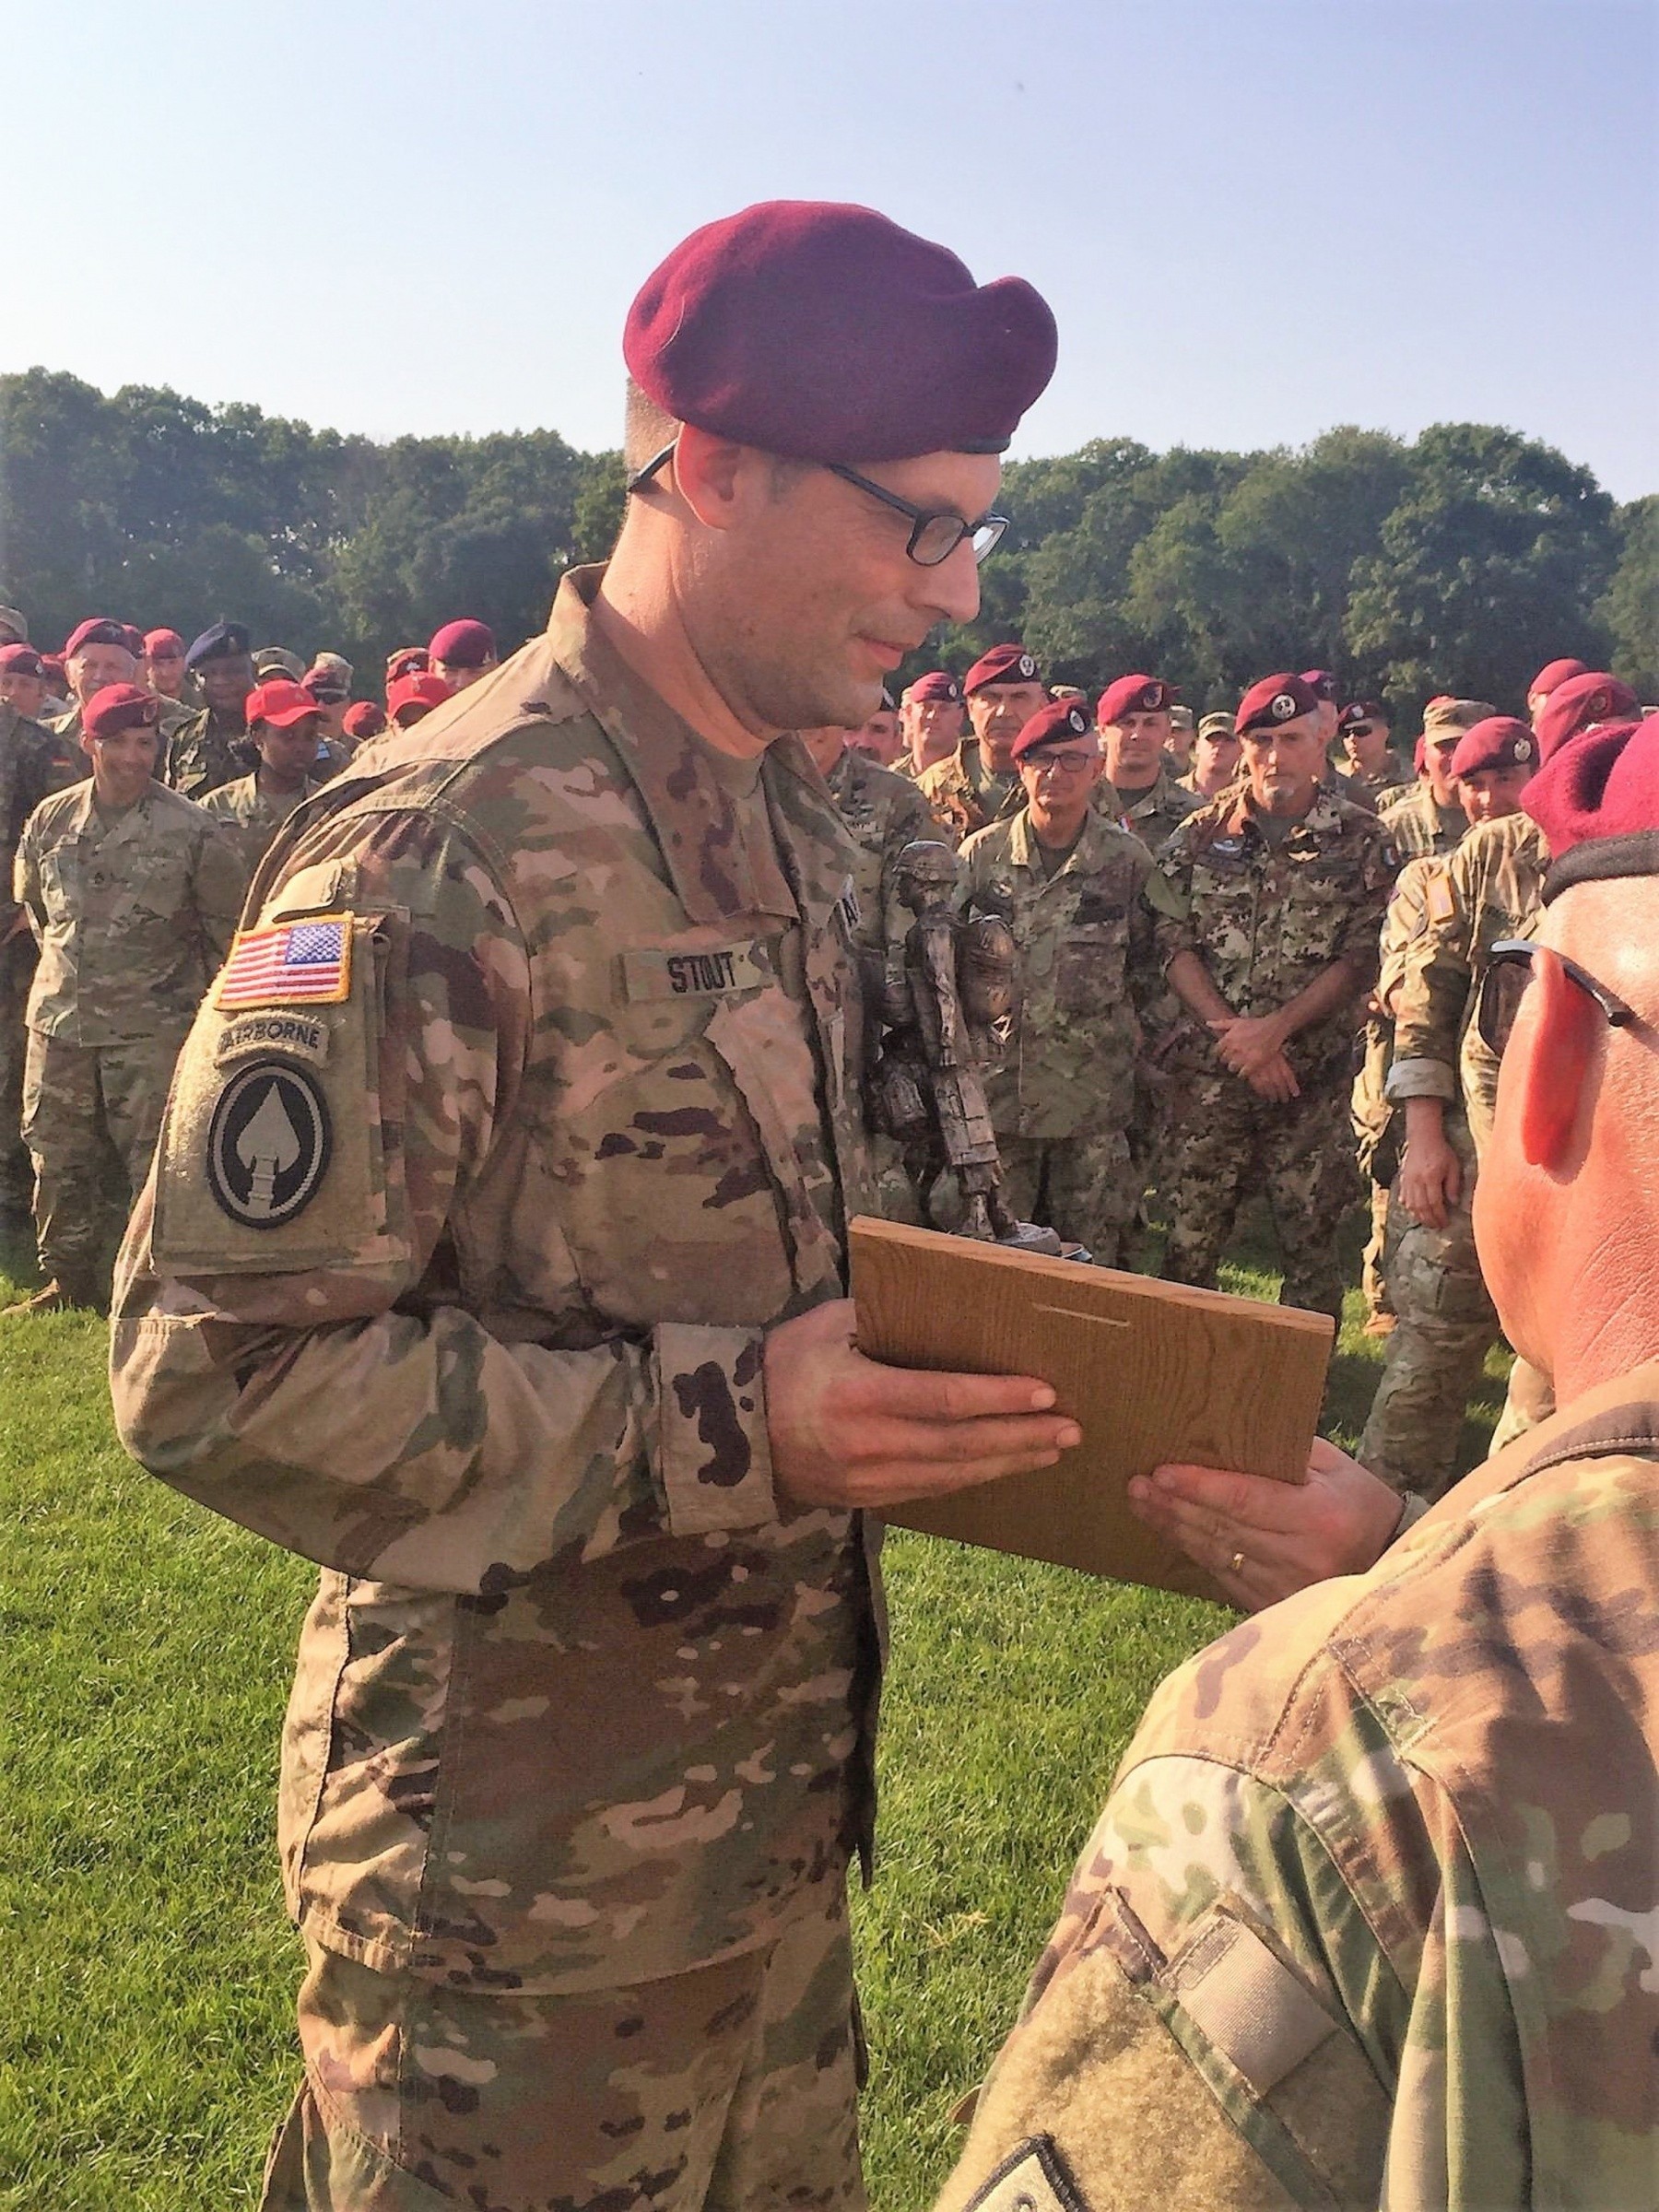 Maryland National Guard Special Ops triumph in international Airborne